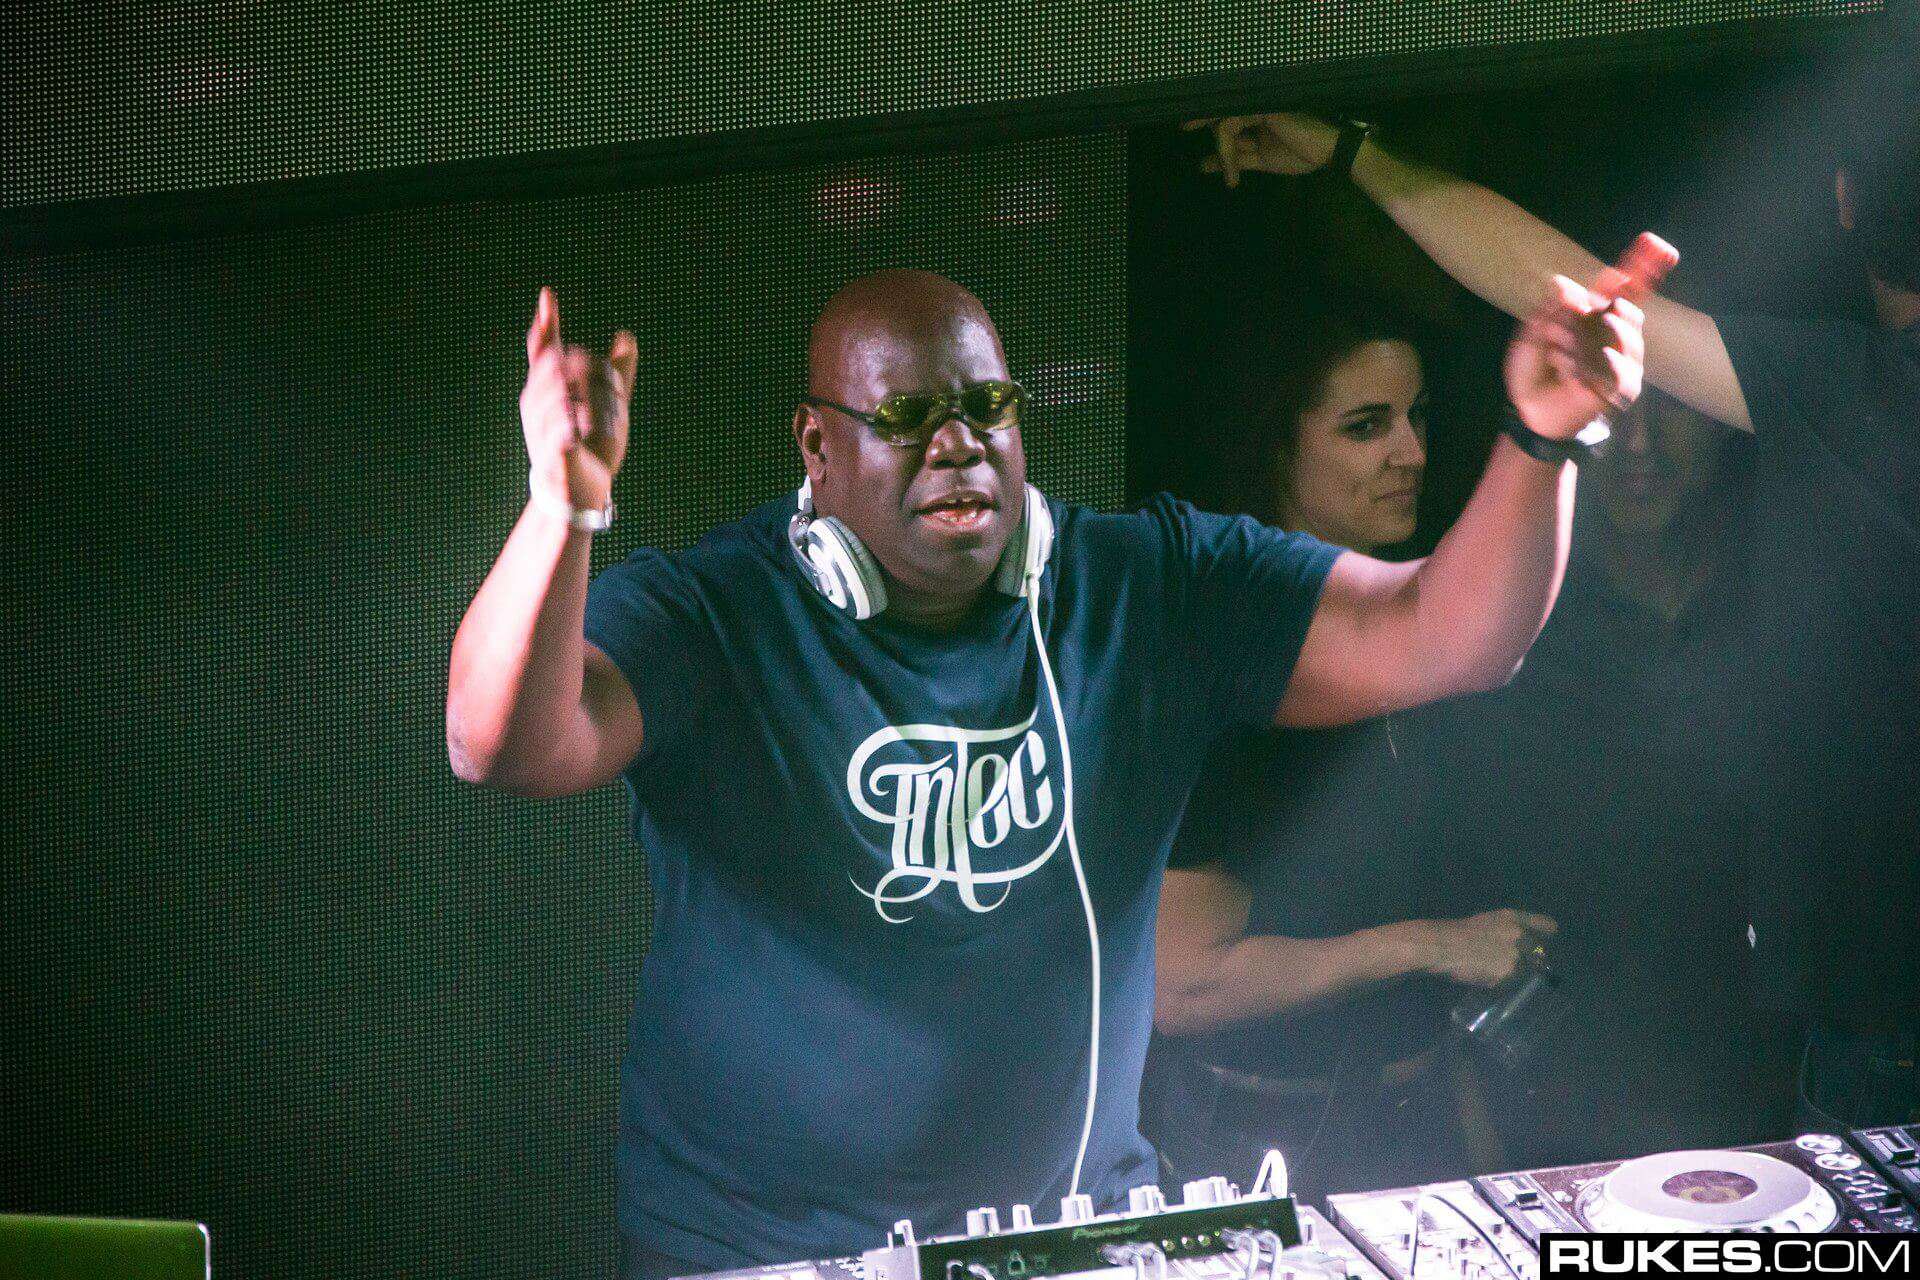 Carl Cox’s full set at Kappa Futur Festival is here for you to relive his techno power: Watch